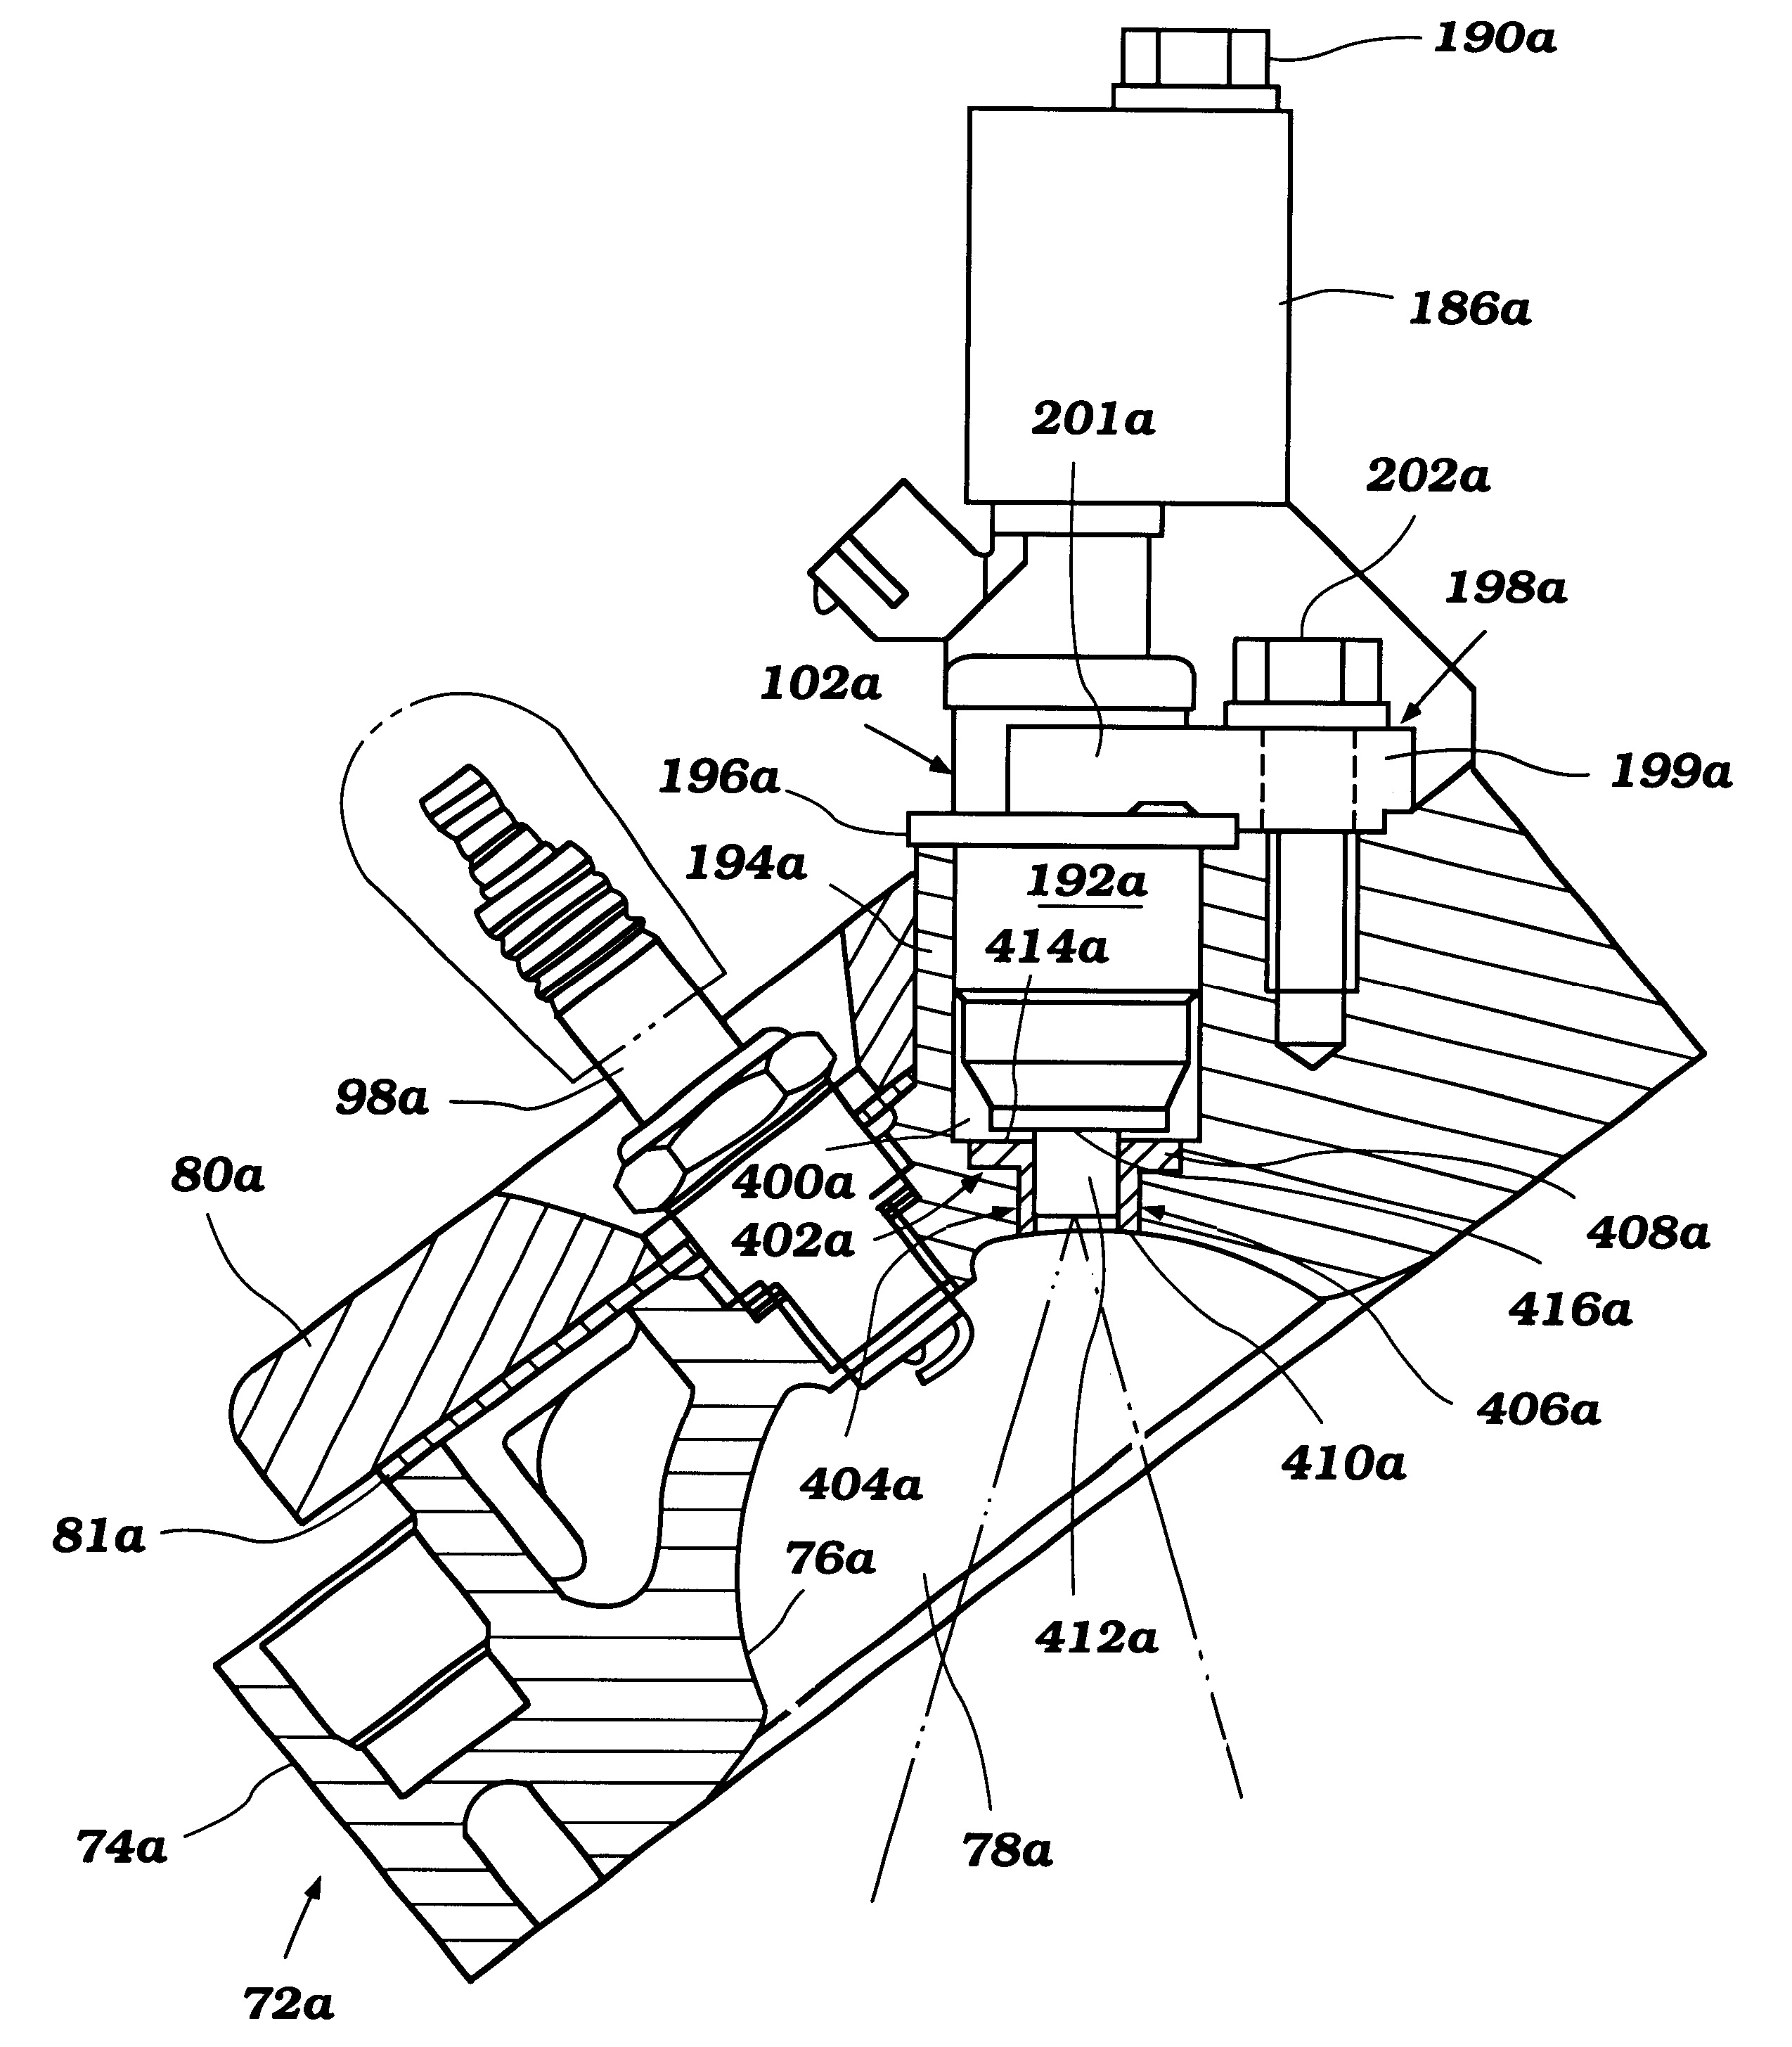 Injector mounting arrangement for direct-injected engines